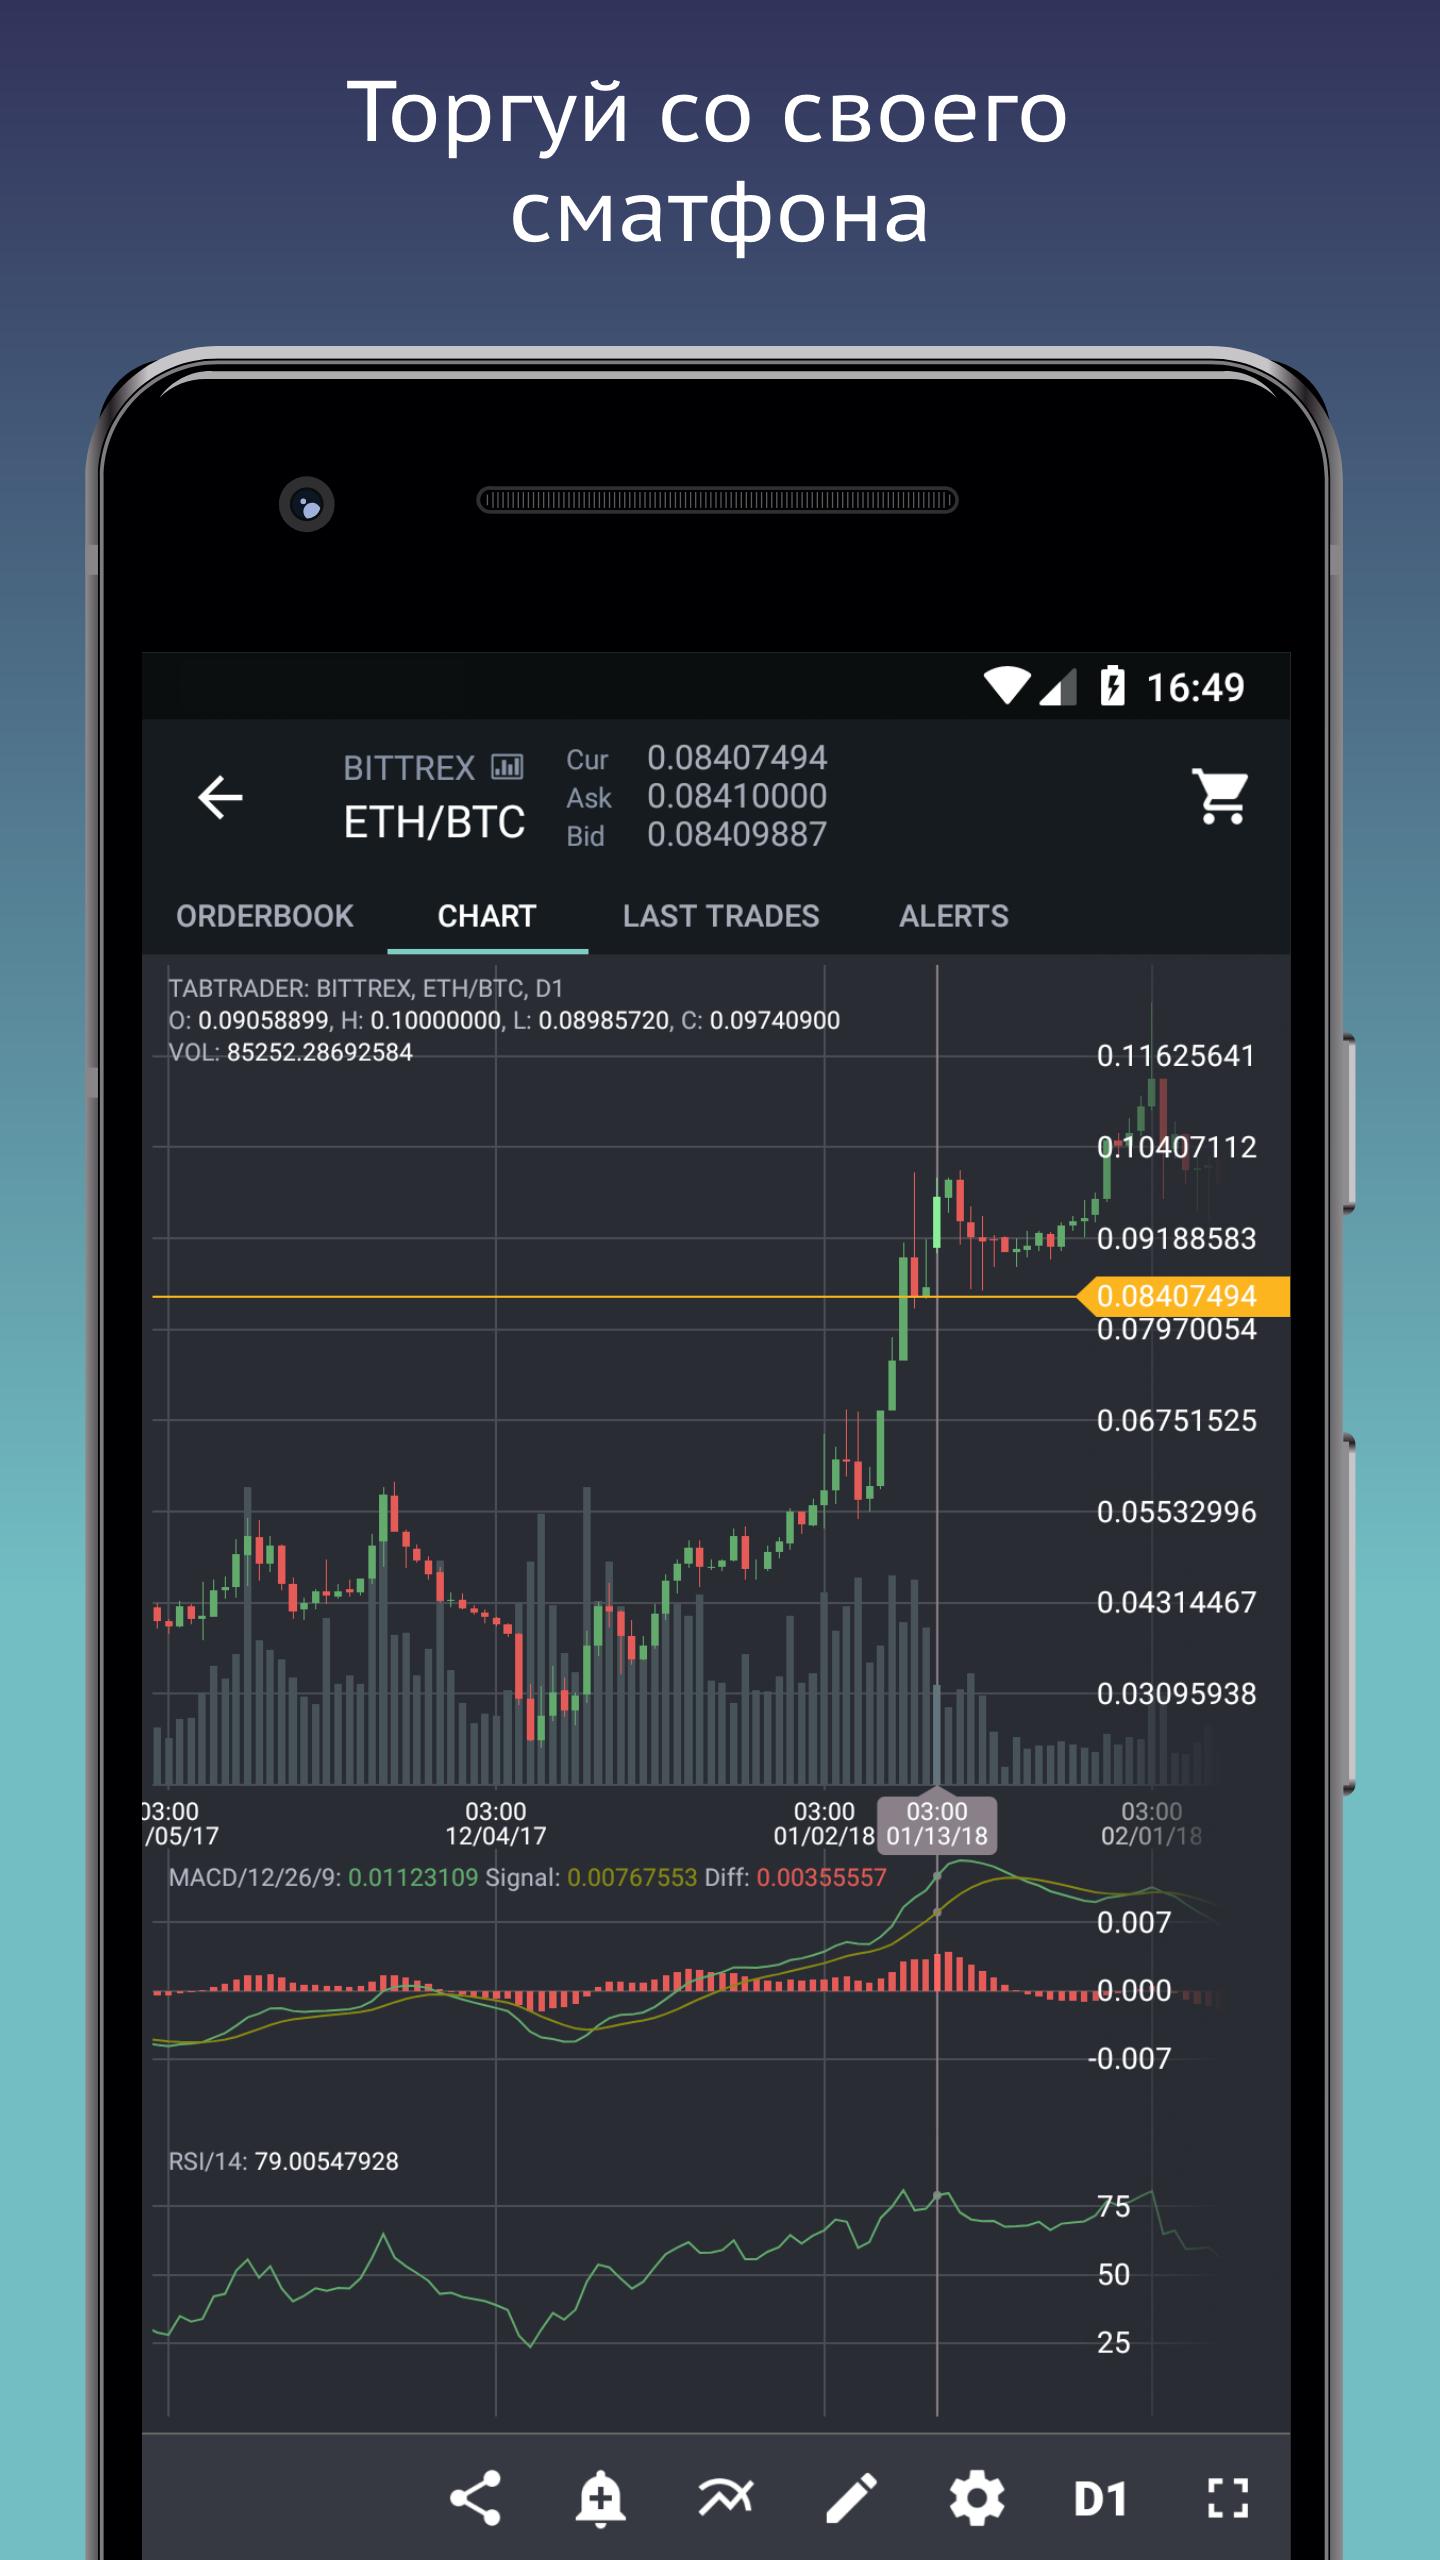 Android bitcoin trading app crypto 2012 accepted papers